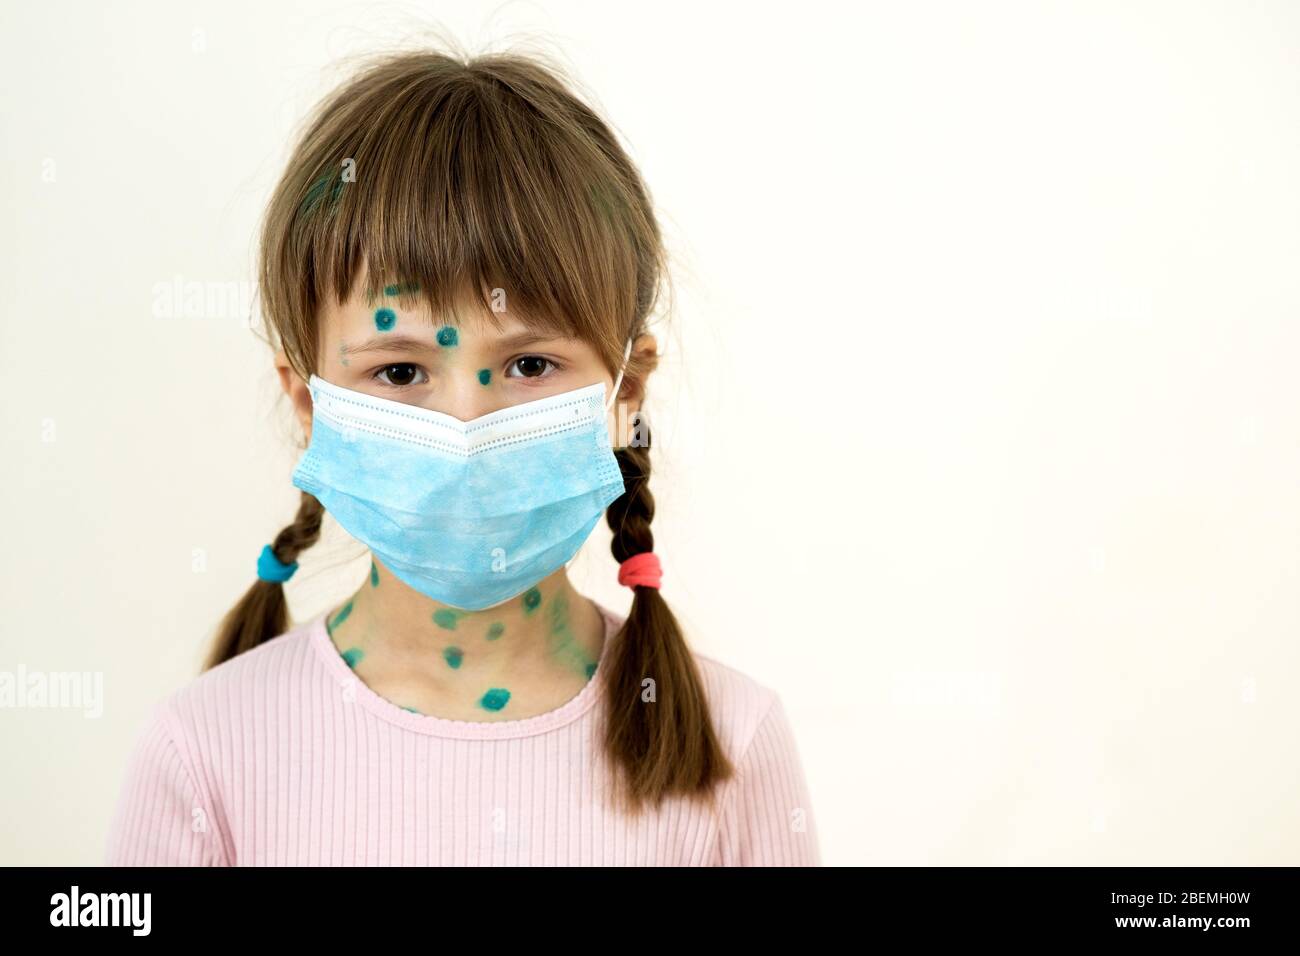 Child girl wearing blue protective medical mask ill with chickenpox, measles or rubella virus with rashes on body. Children protection during epidemic Stock Photo